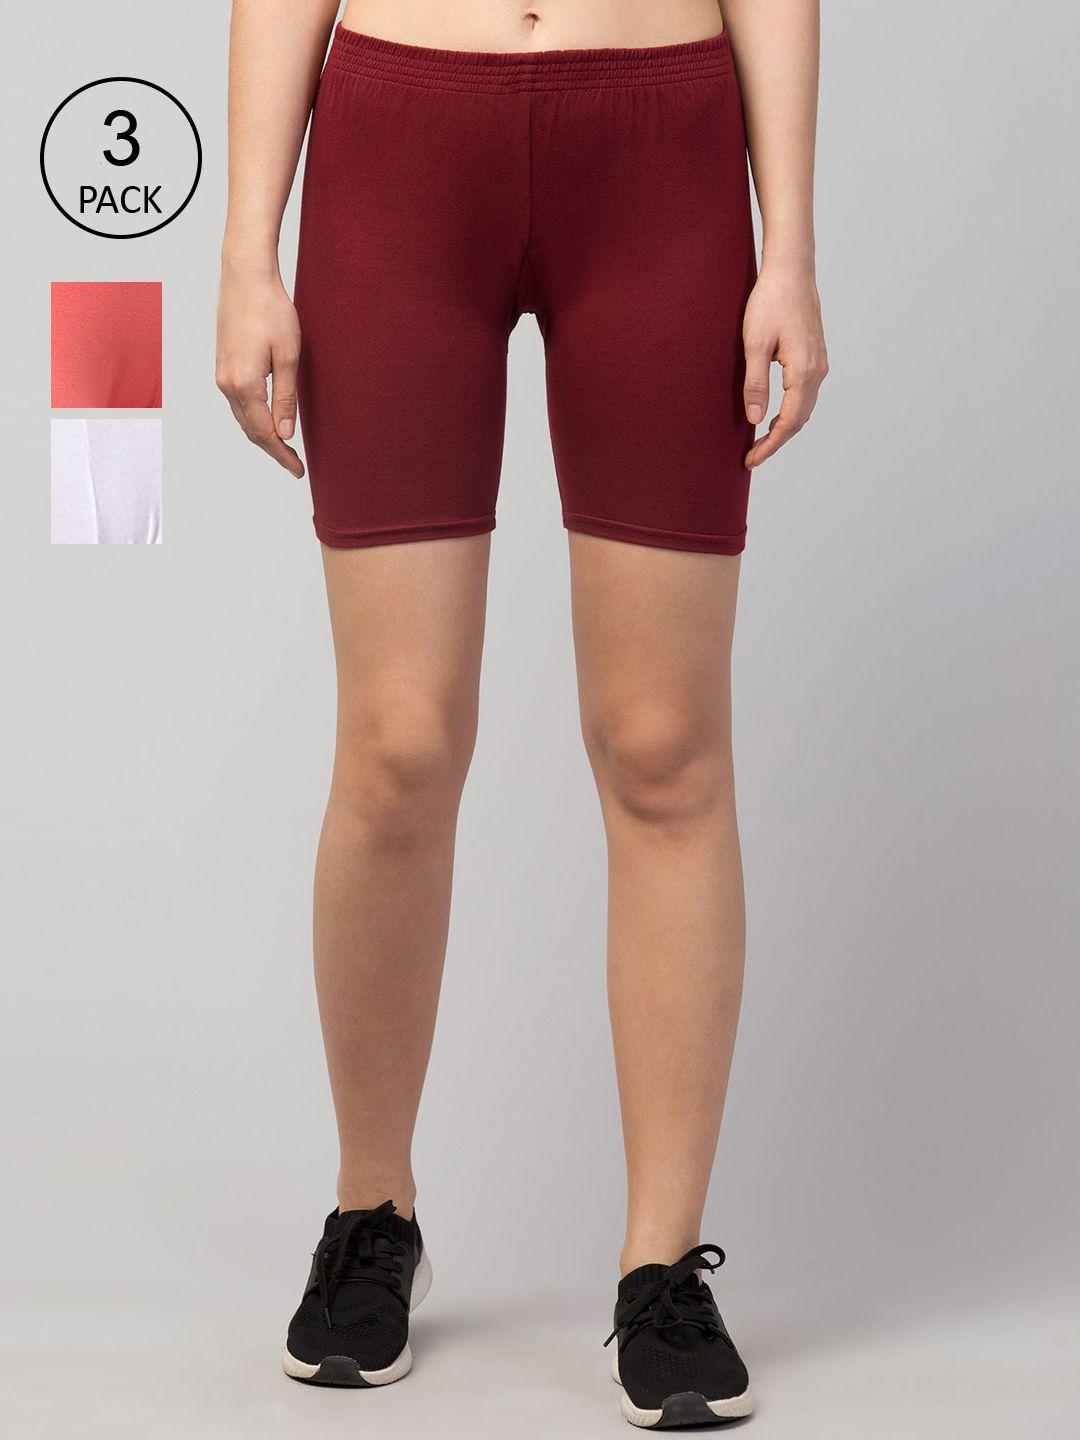 apraa-&-parma-women-maroon-slim-fit-cycling-sports-shorts-pack-of-3